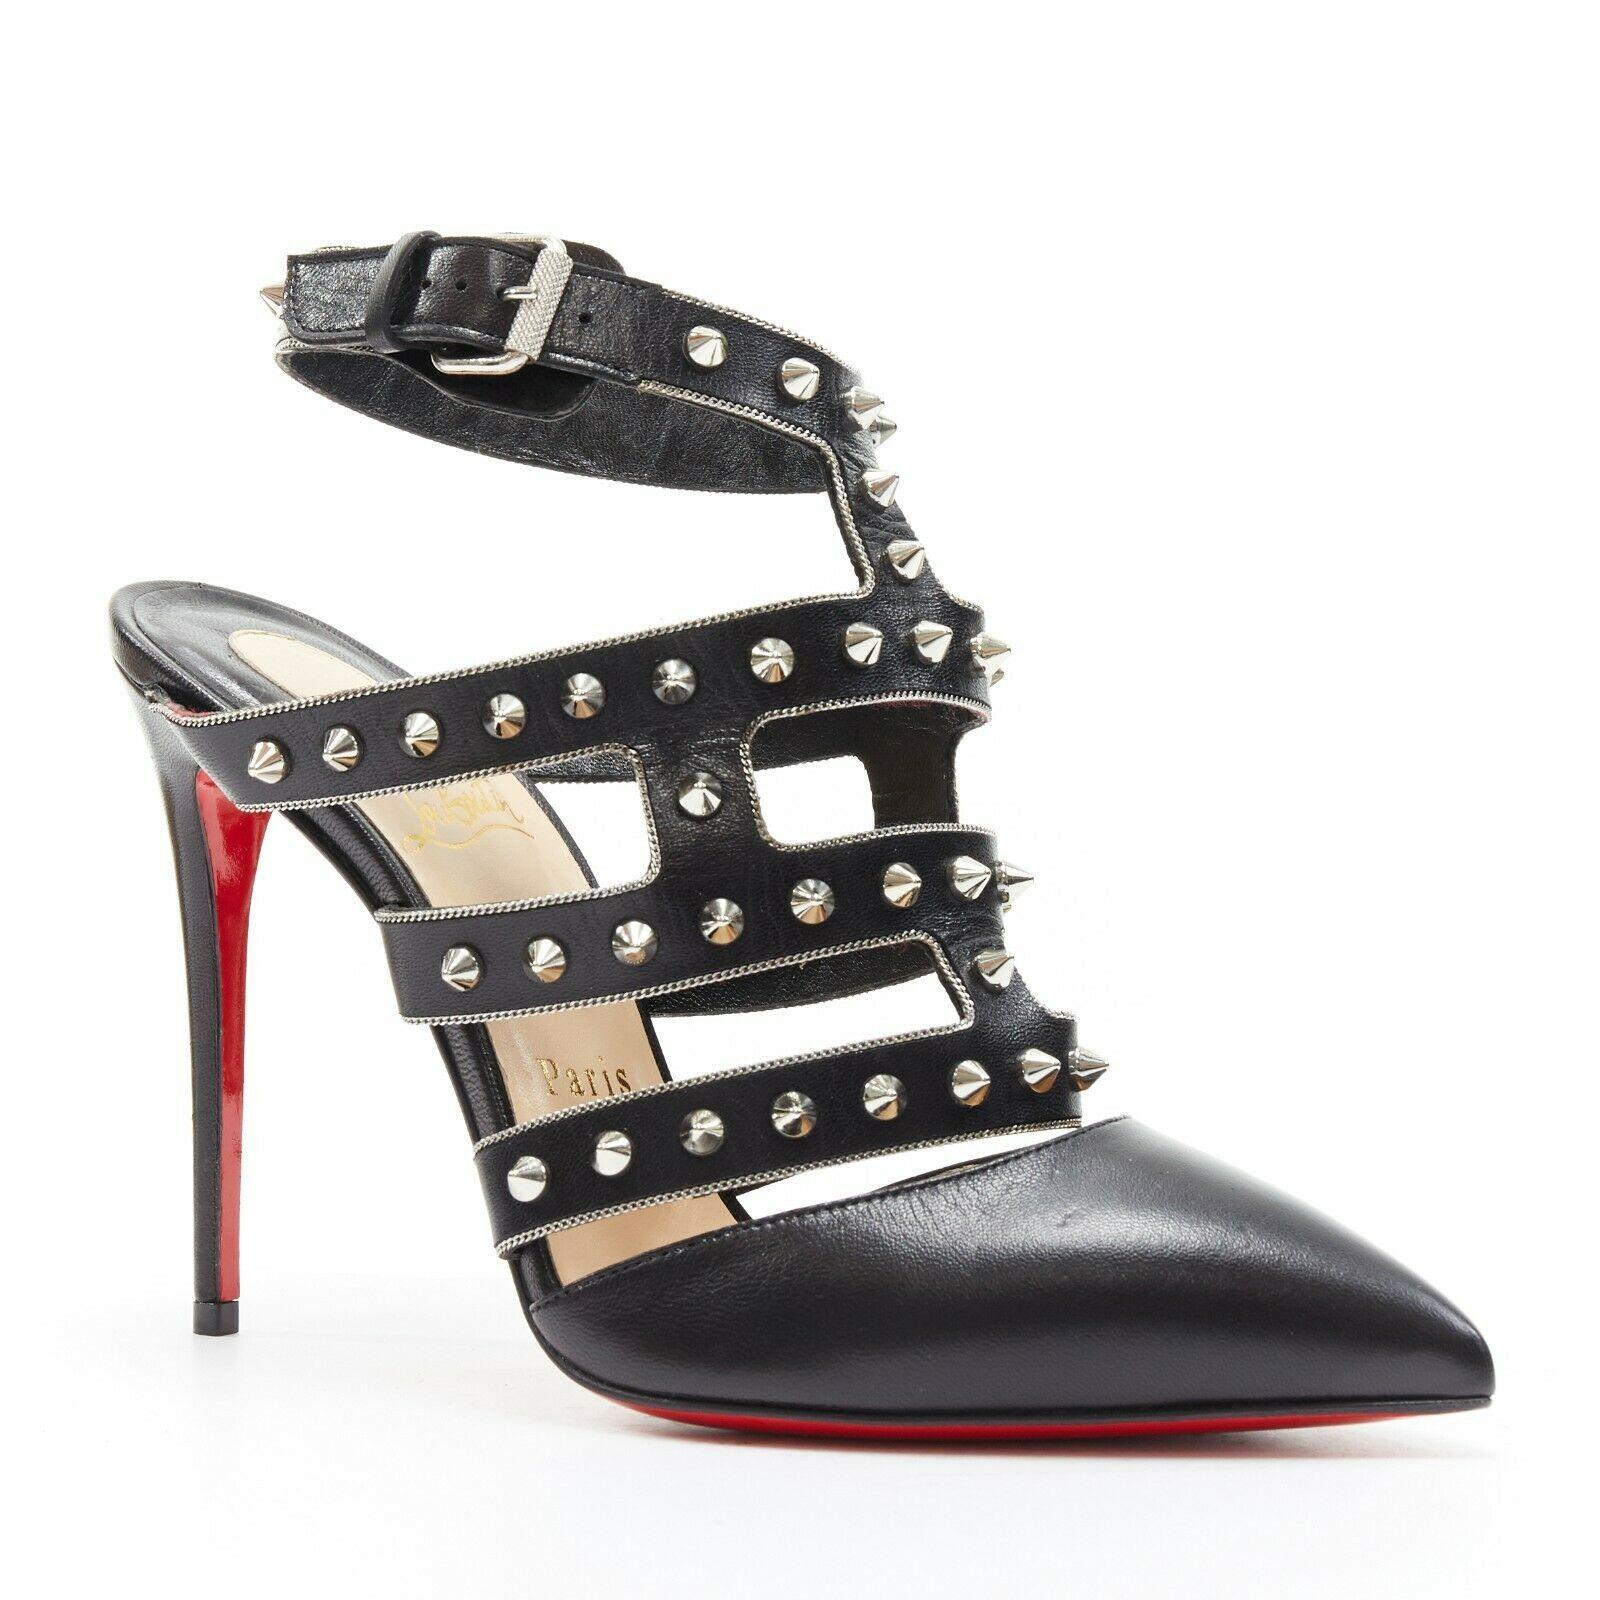 new CHRISTIAN LOUBOUTIN Tchicaboum 100 black spike stud chain trimmed pump EU37
CHRISTIAN LOUBOUTIN
Tchicaboum 100. 
Black leather upper. 
Silver-tone hardware. 
Spike stud embellishment. 
Silver fine chain trimming. 
Pointed toe. 
Cut out design.